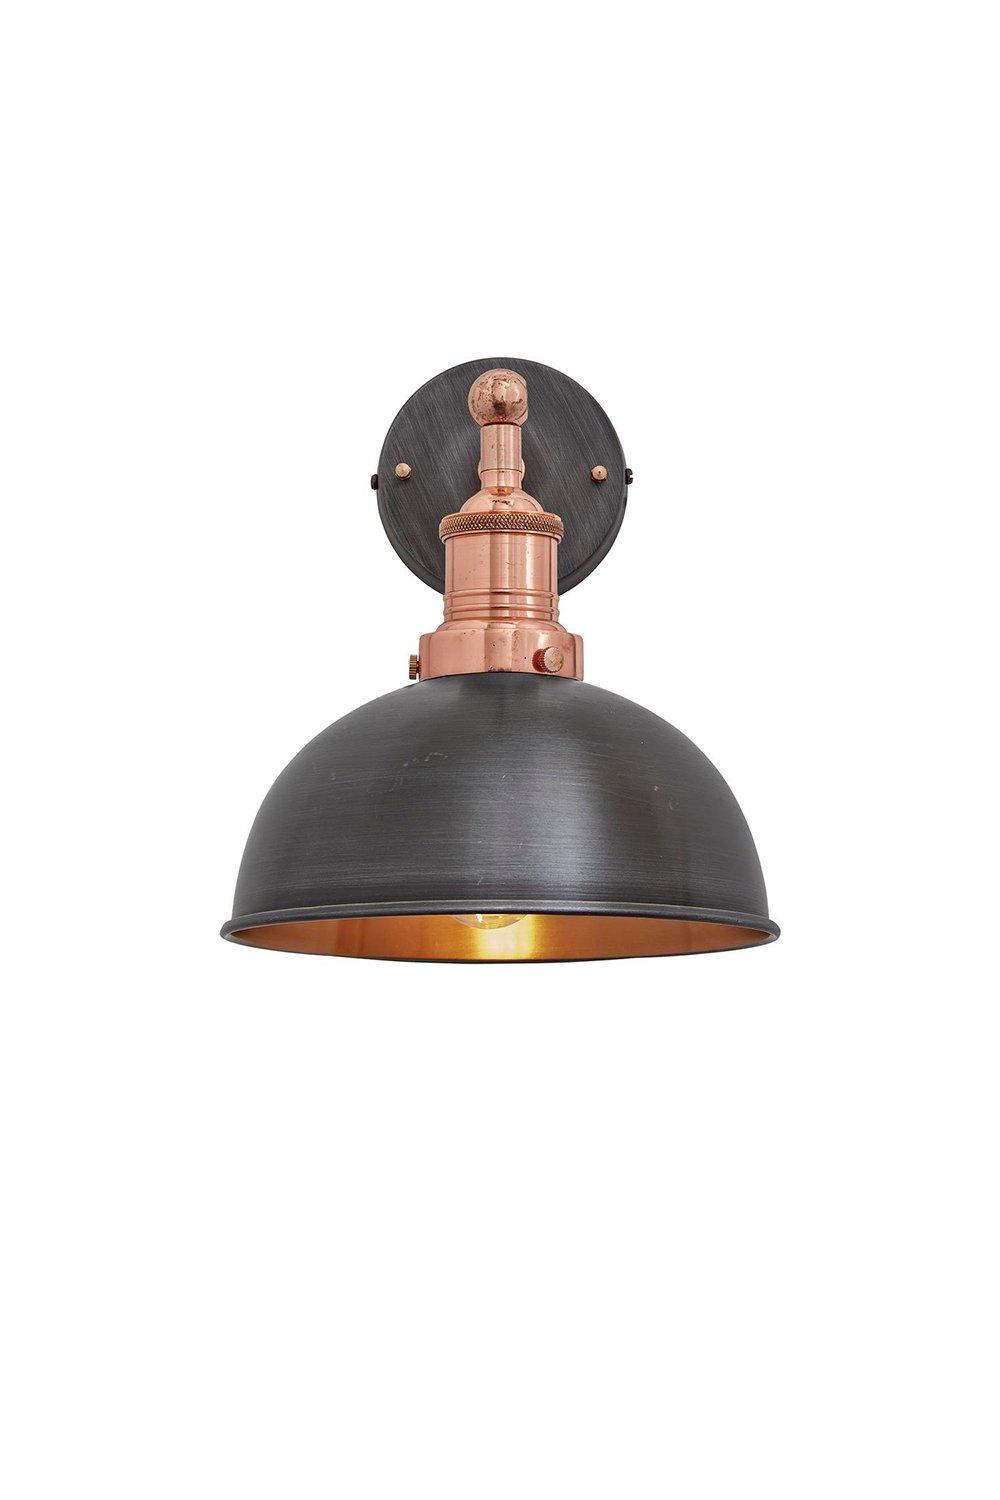 Brooklyn Dome Wall Light, 8 Inch, Pewter & Copper, Copper Holder